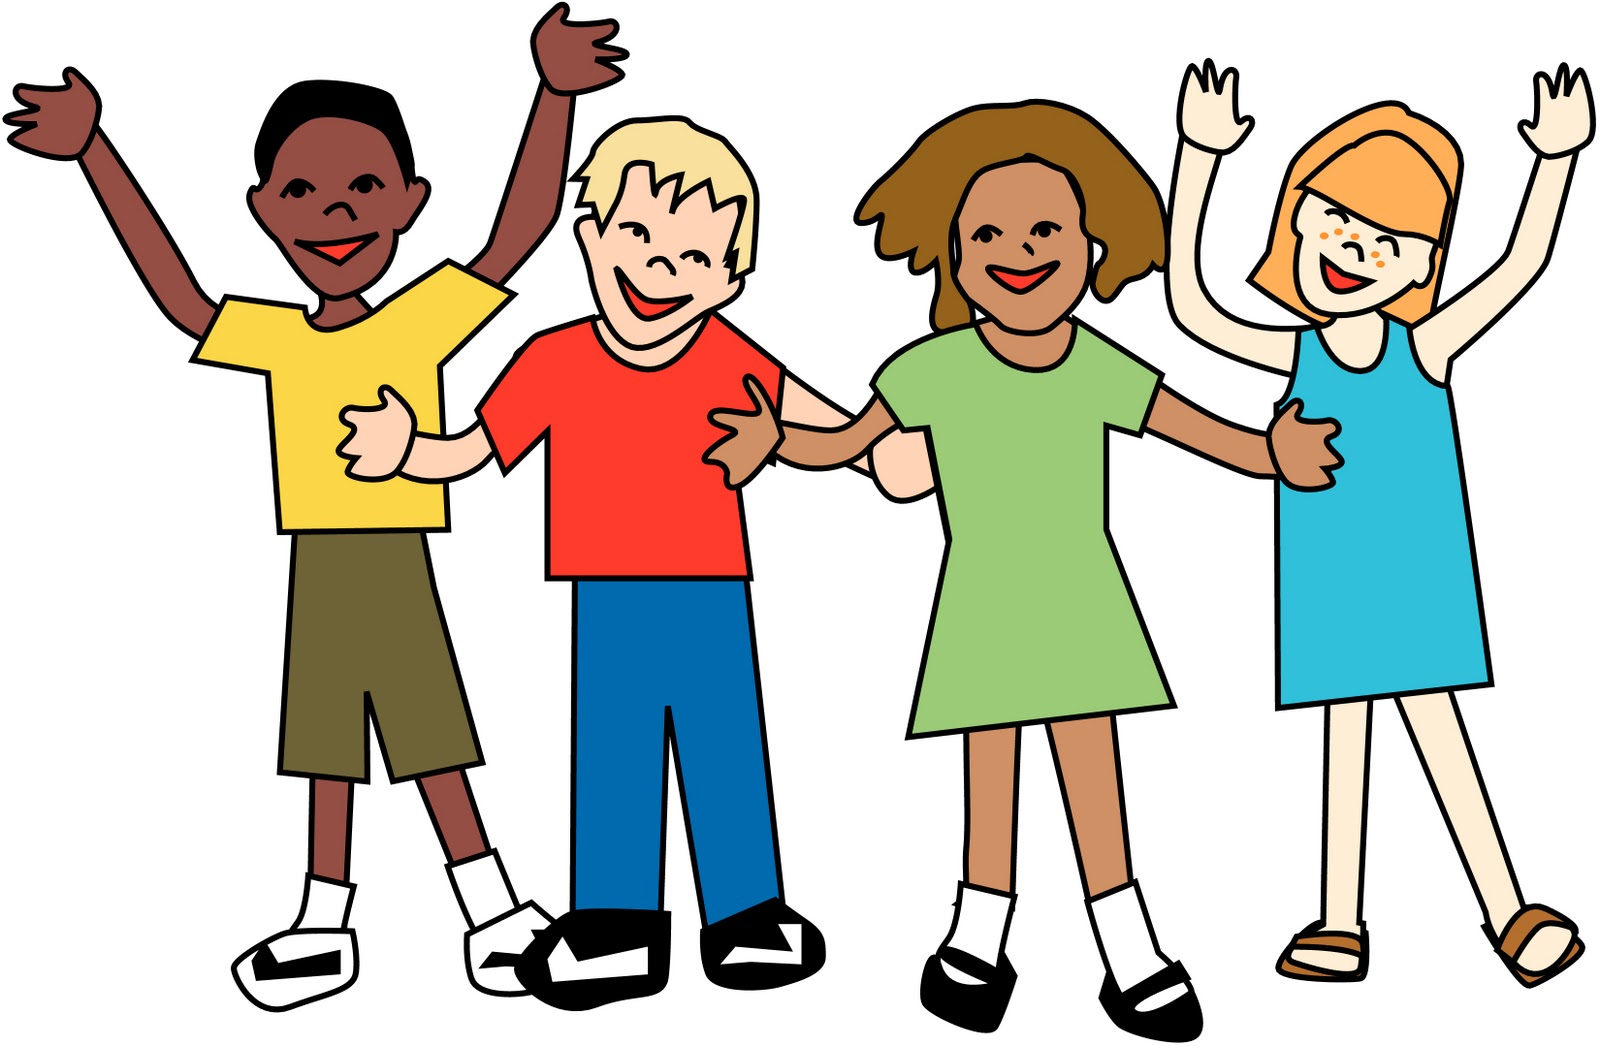 Free Group Of Children Images, Download Free Clip Art, Free